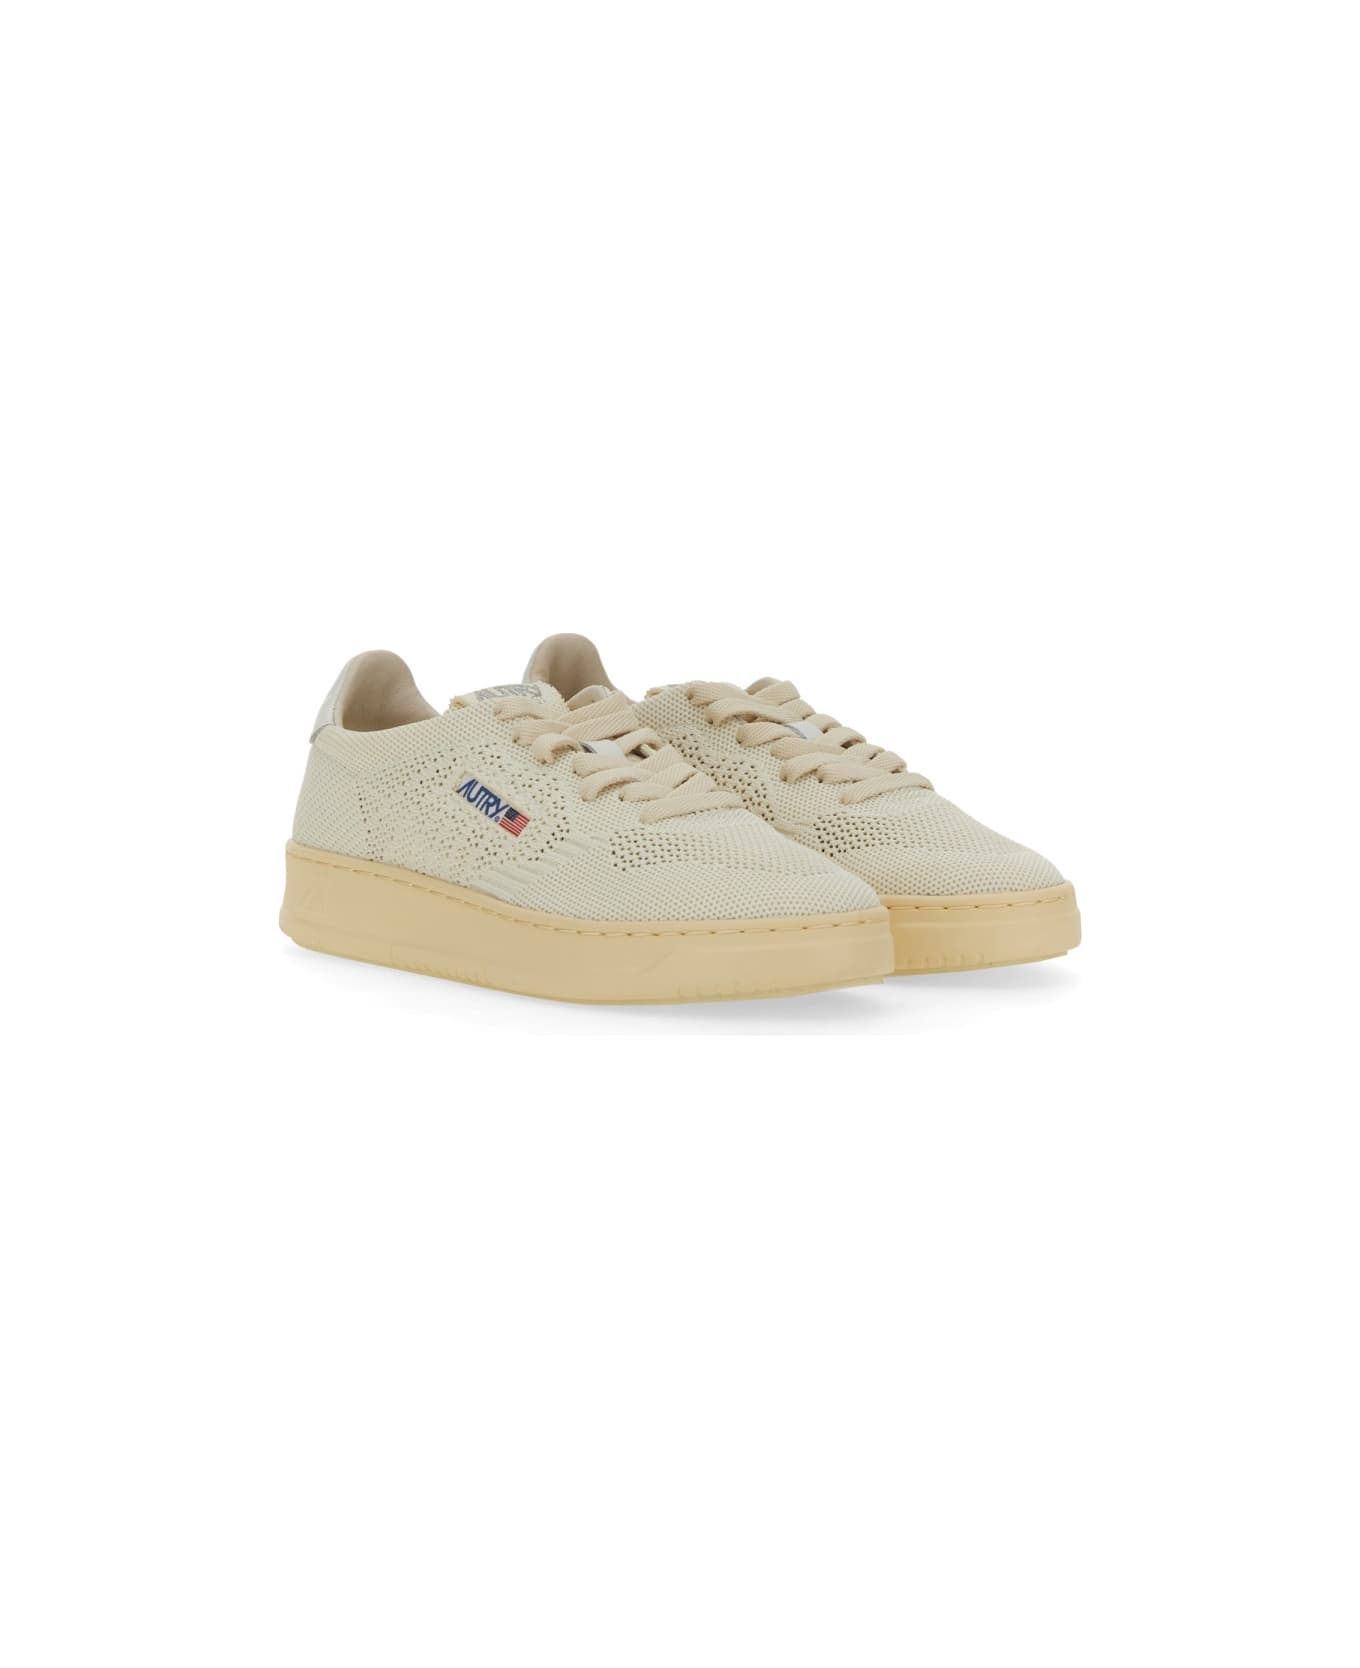 Autry Medalist Easeknit Low Sneakers - Non definito スニーカー